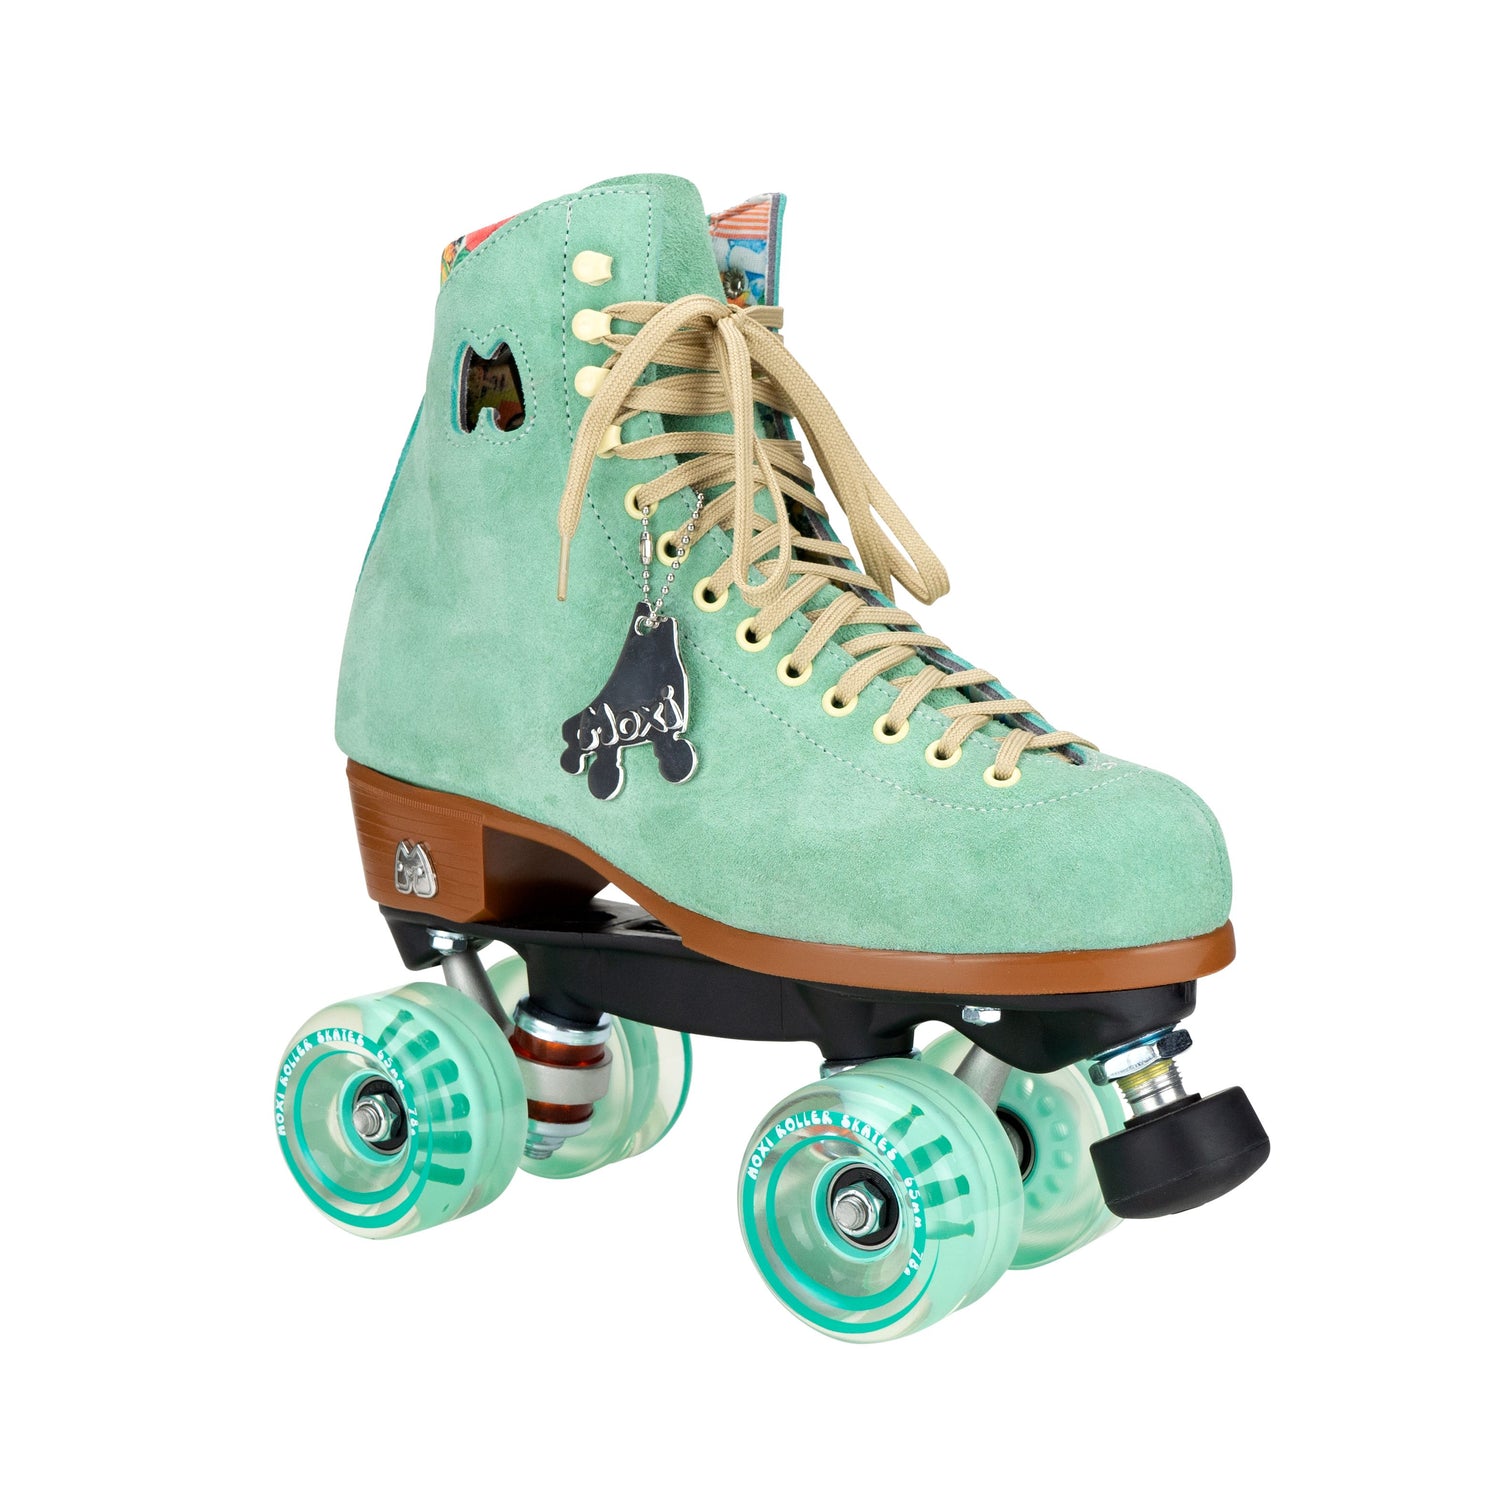 Come to Fresa's Roller Skate shop in Las Vegas and get your Moxi Lollys Skates.  These floss Moxi Lolly Roller Skates are ready to the outdoor. Cruise around Las Vegas Art District or come and skate in our indoor skate ramp.